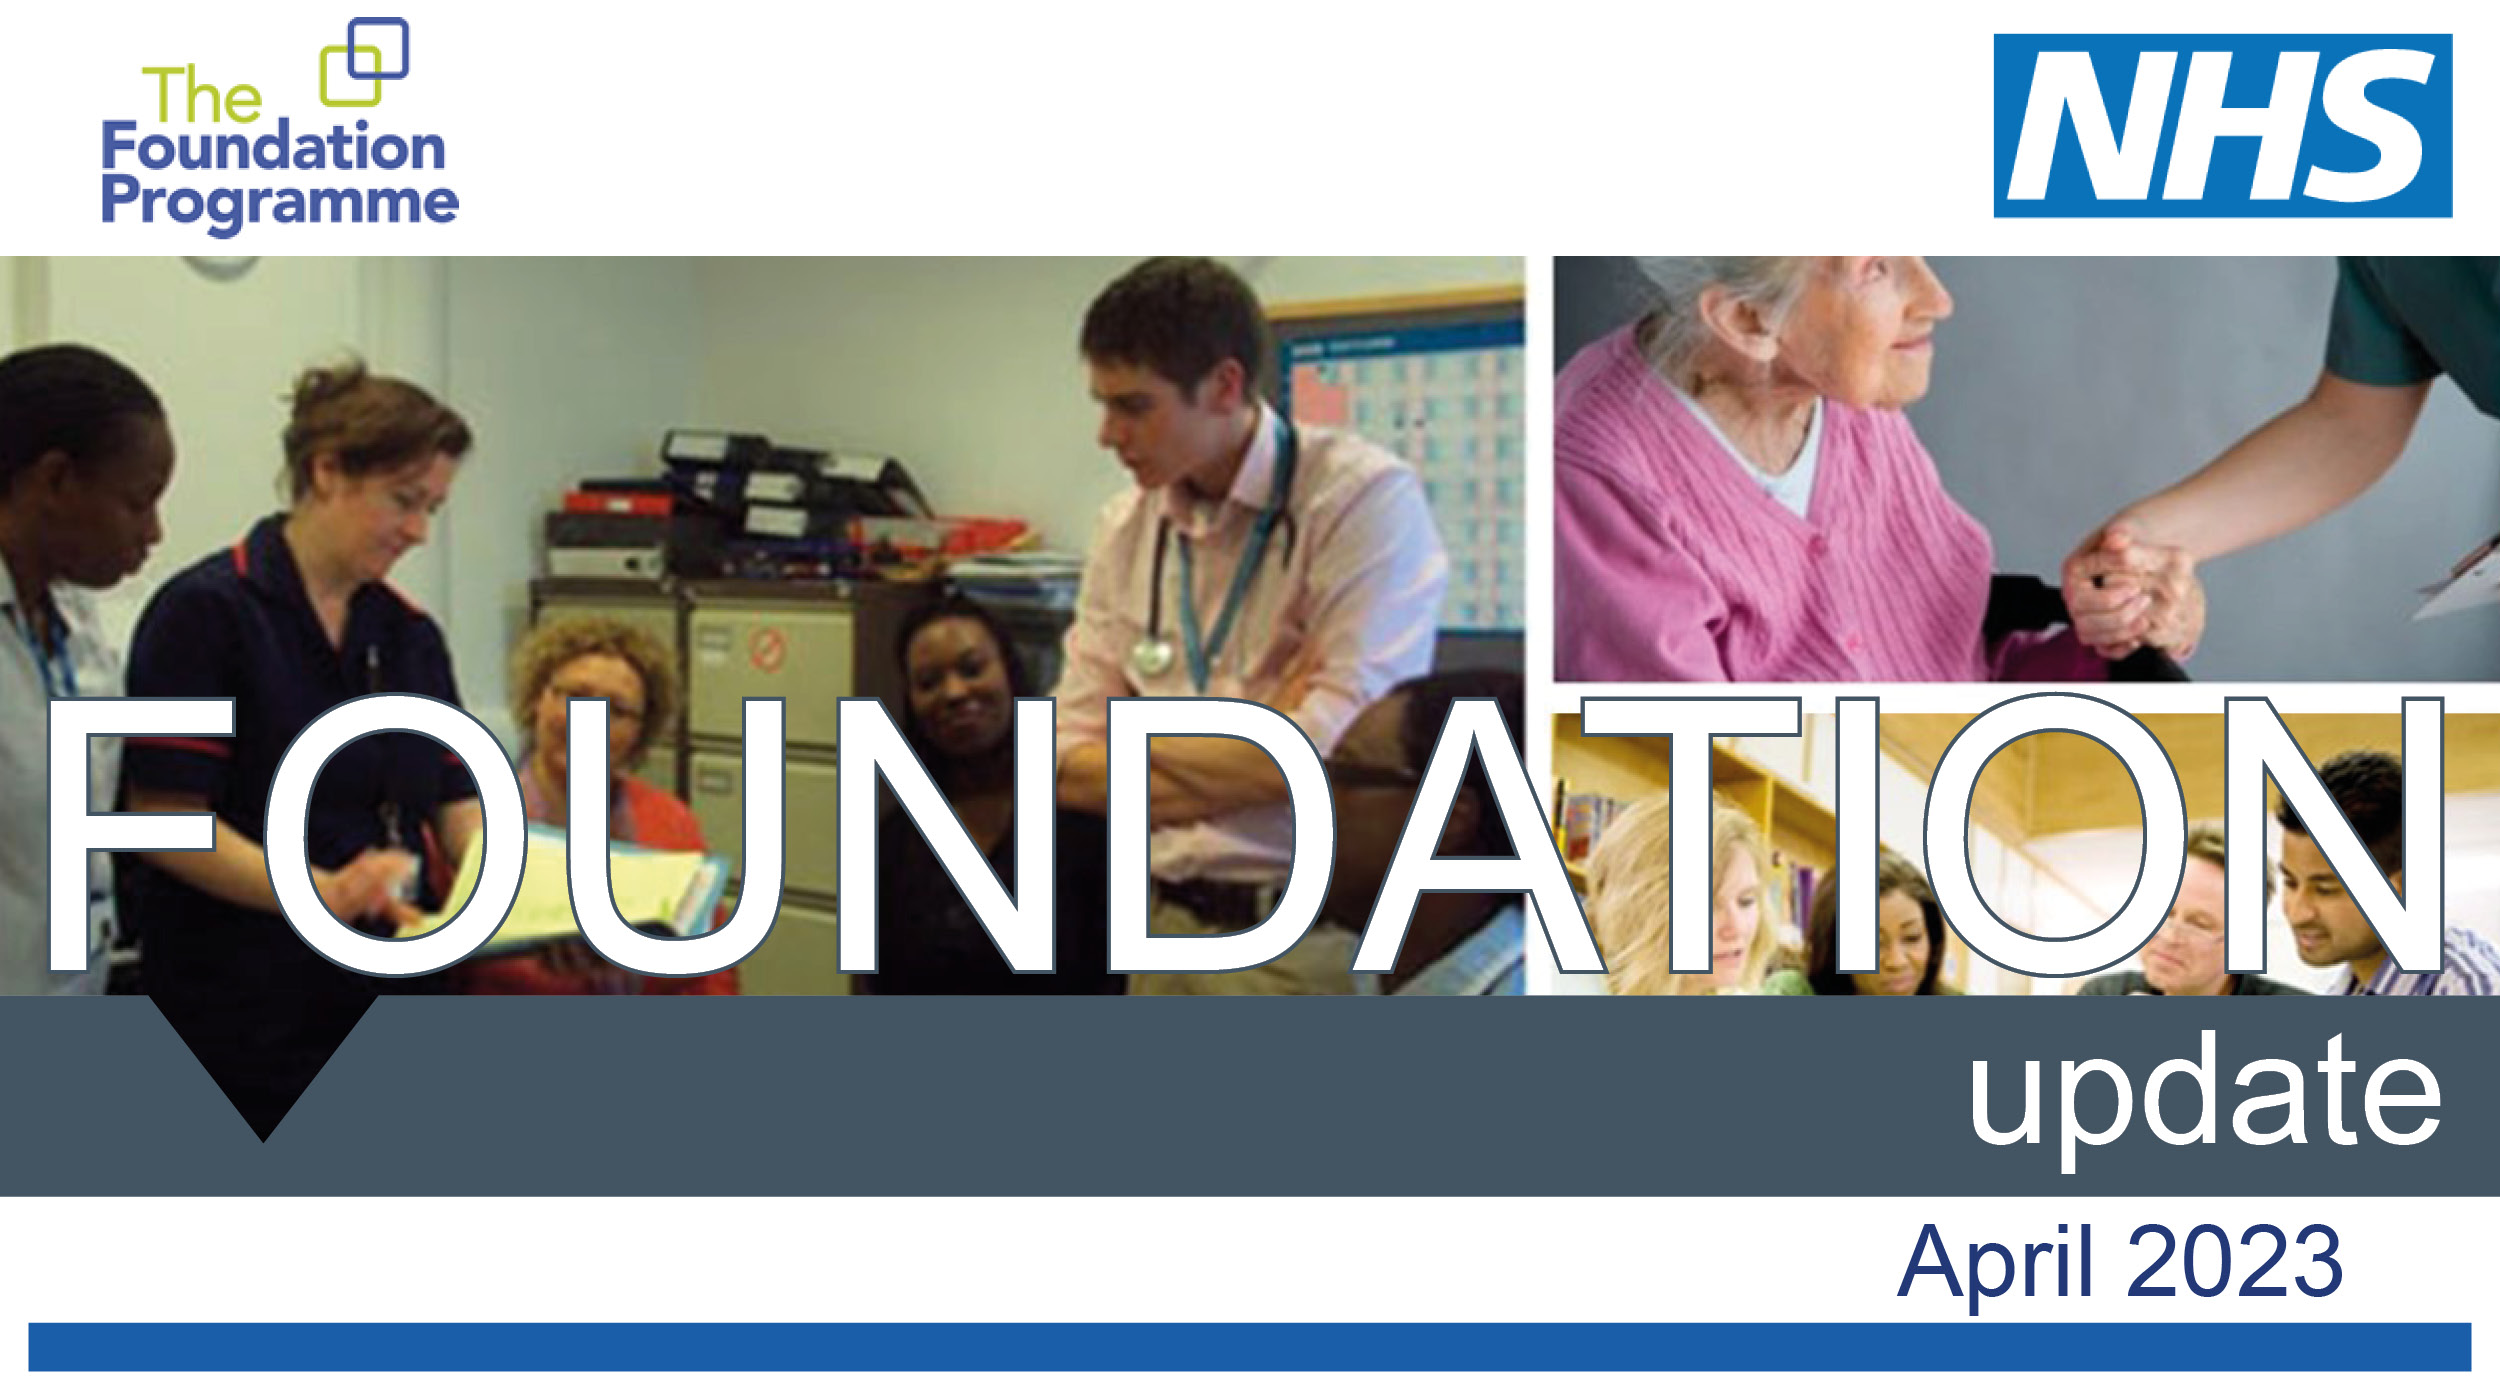 Foundation Update - April 2023, including a collage of photos showing patients and healthcare professionals planning support.